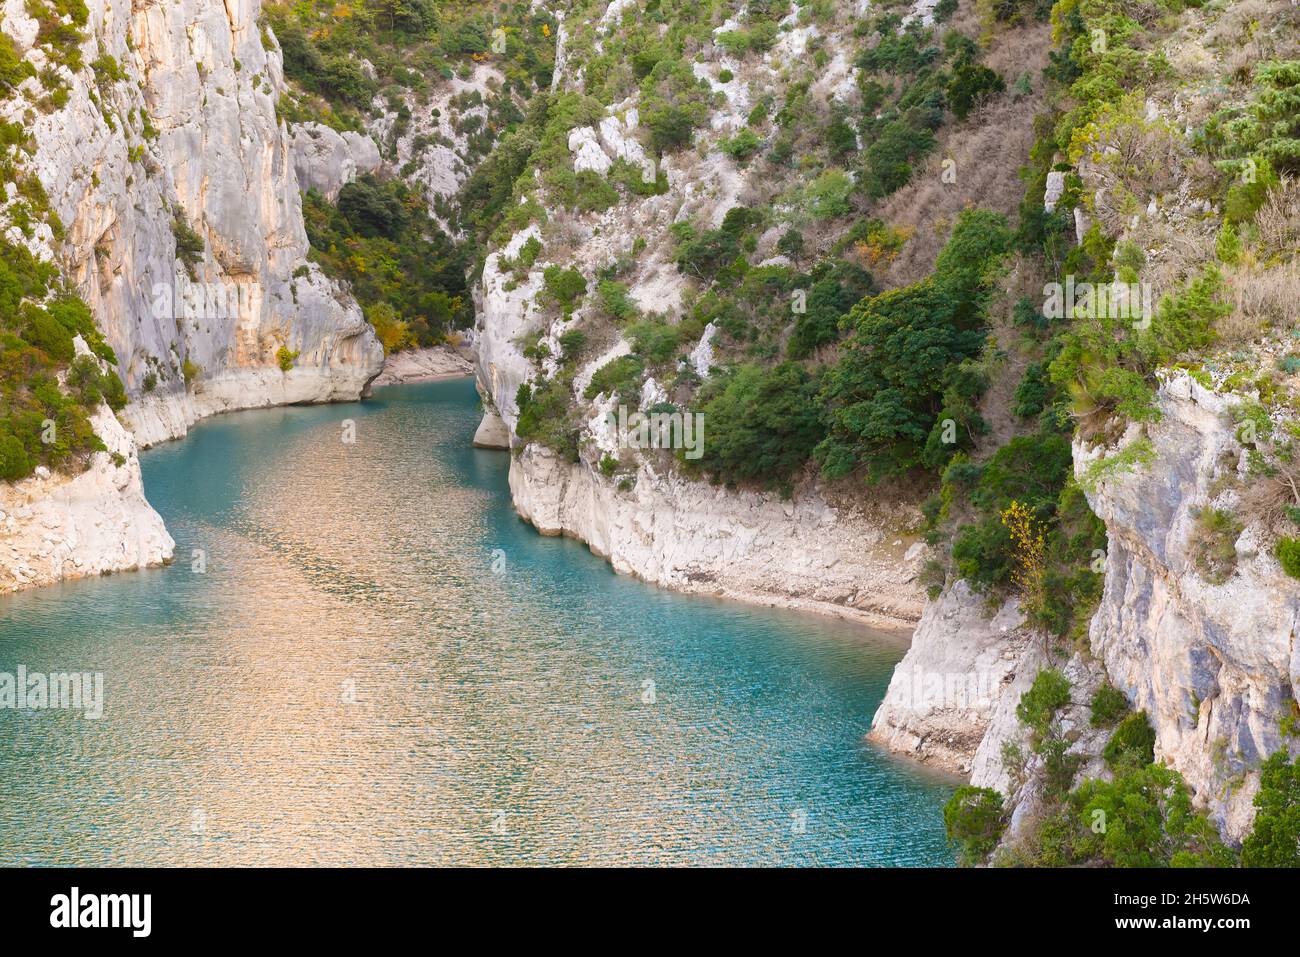 The Verdon Gorge (French: Gorges du Verdon) is a famous river canyon located in the Provence-Alpes-Côte d'Azur region of Southeastern France. Stock Photo